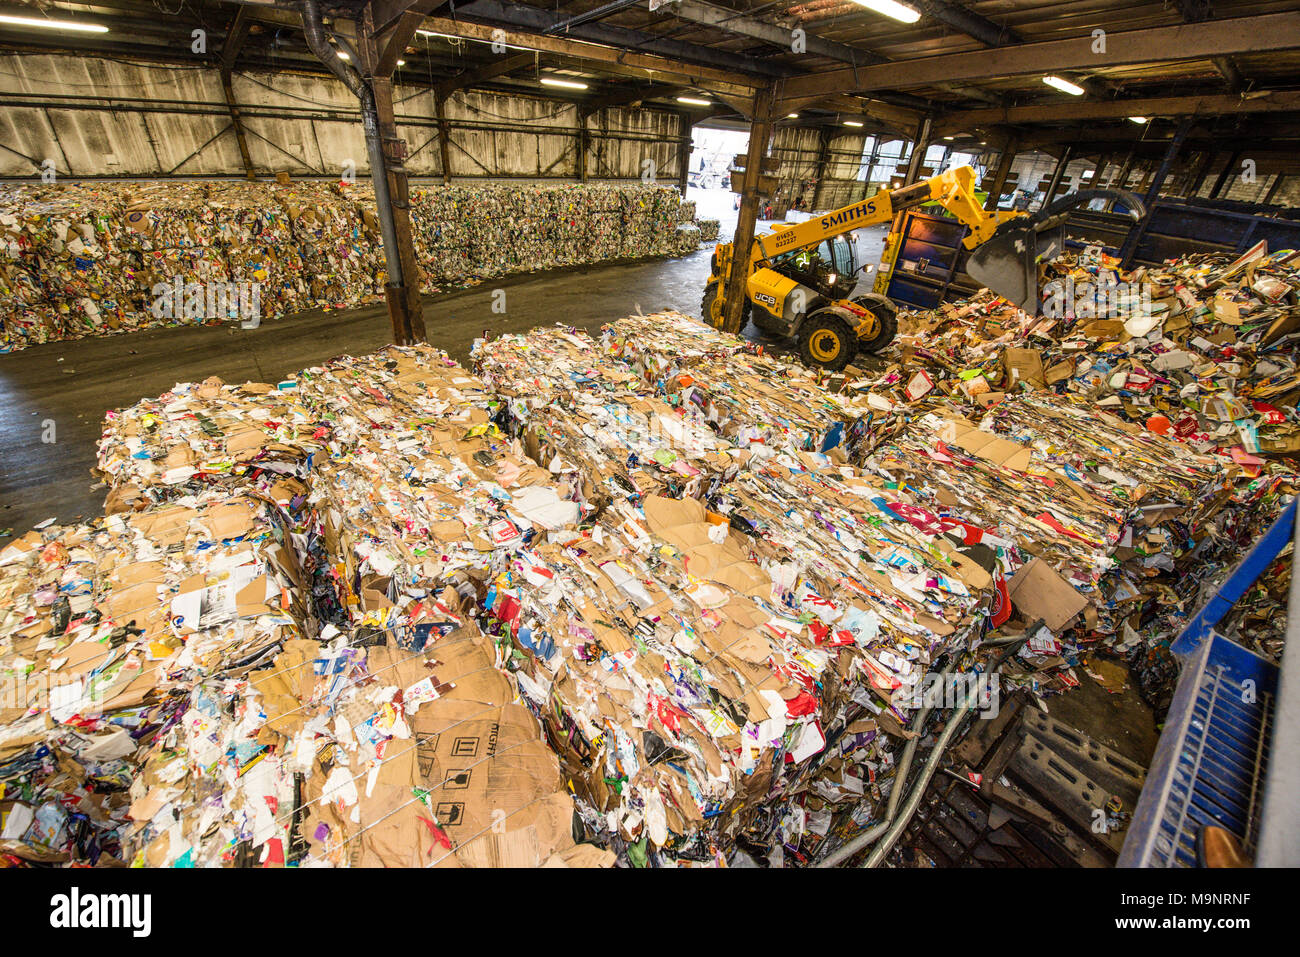 Bales of recycled cardboard and plastic in a large council-run warehouse and a yellow forklift truck grabbing a pile of rubbish at the recycling plant Stock Photo